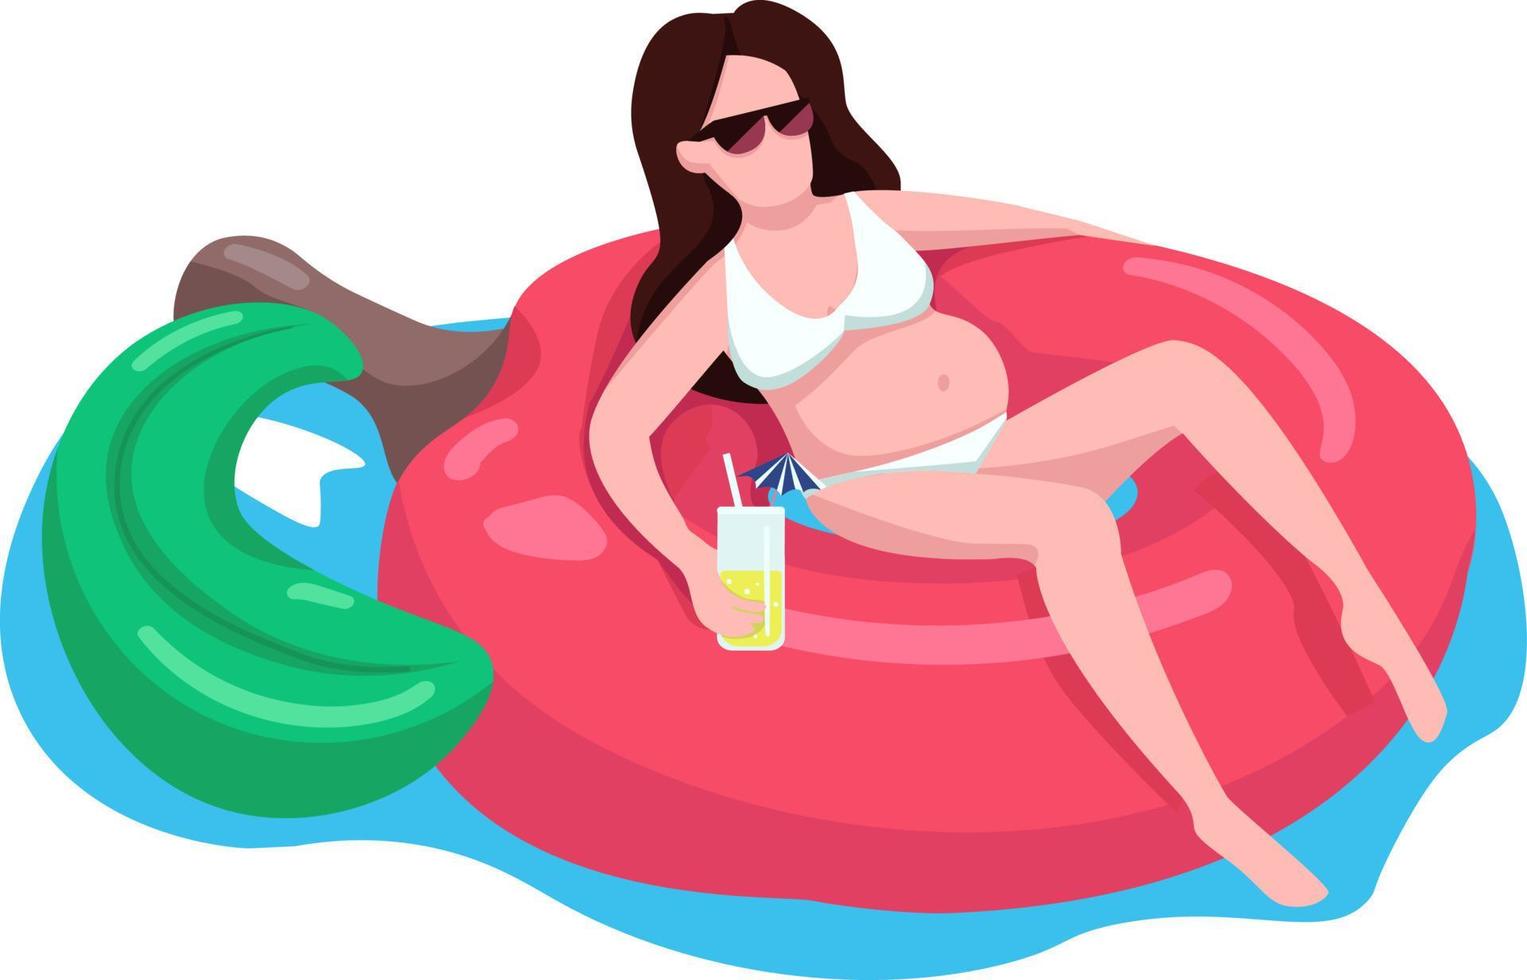 Pregnant woman in cherry air mattress semi flat color vector character